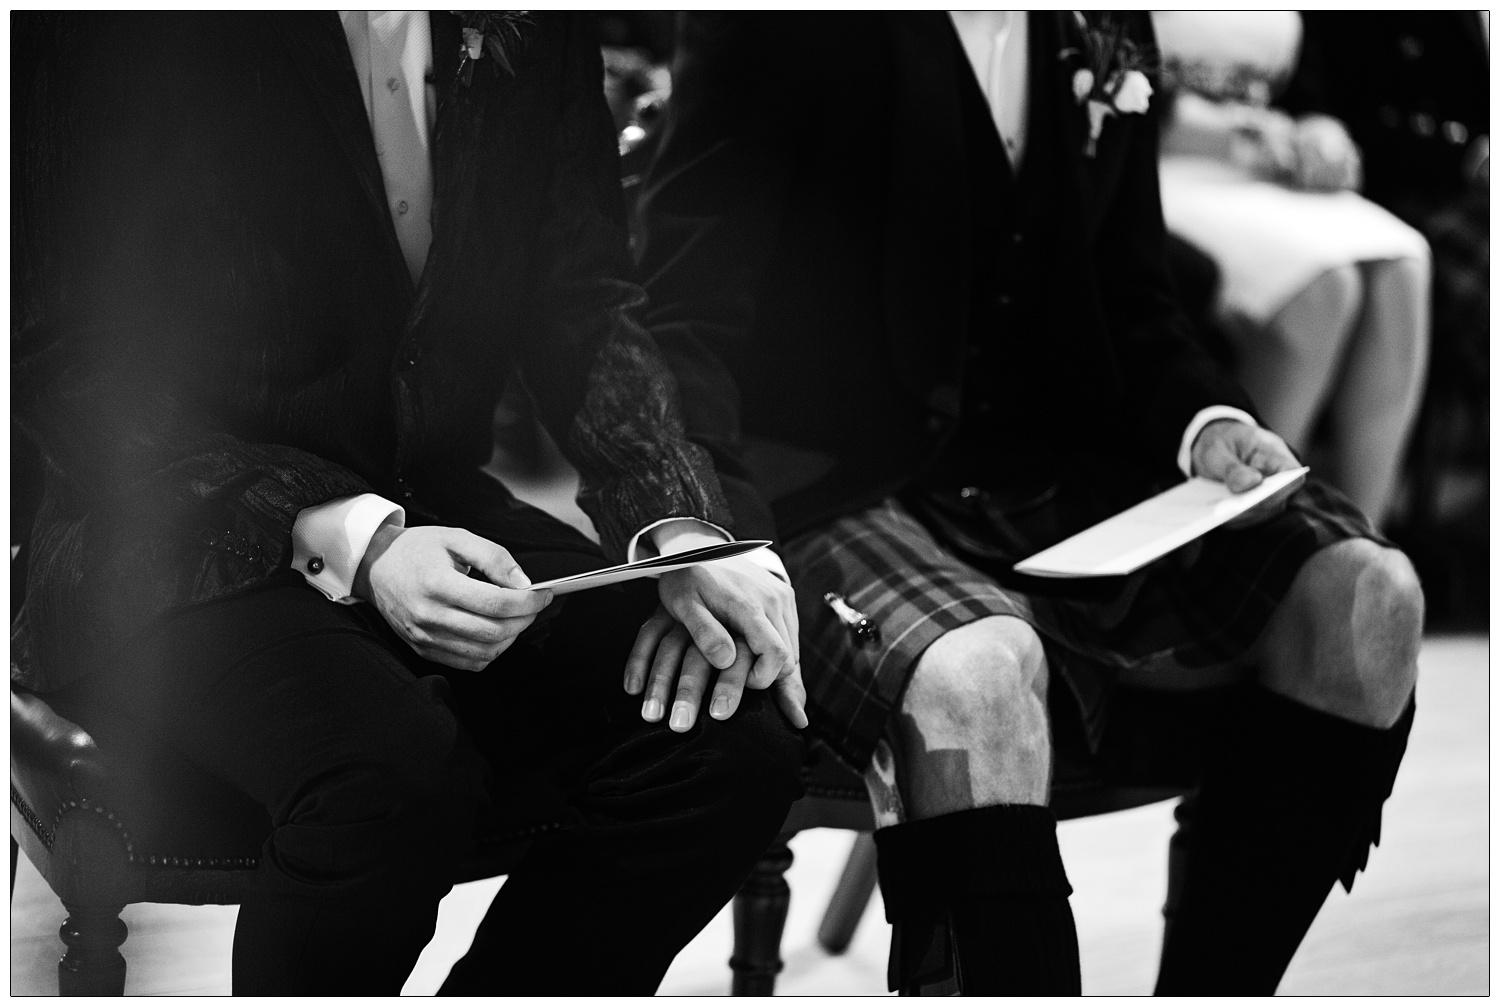 A man in a kilt puts his hand on the knee of his husband.